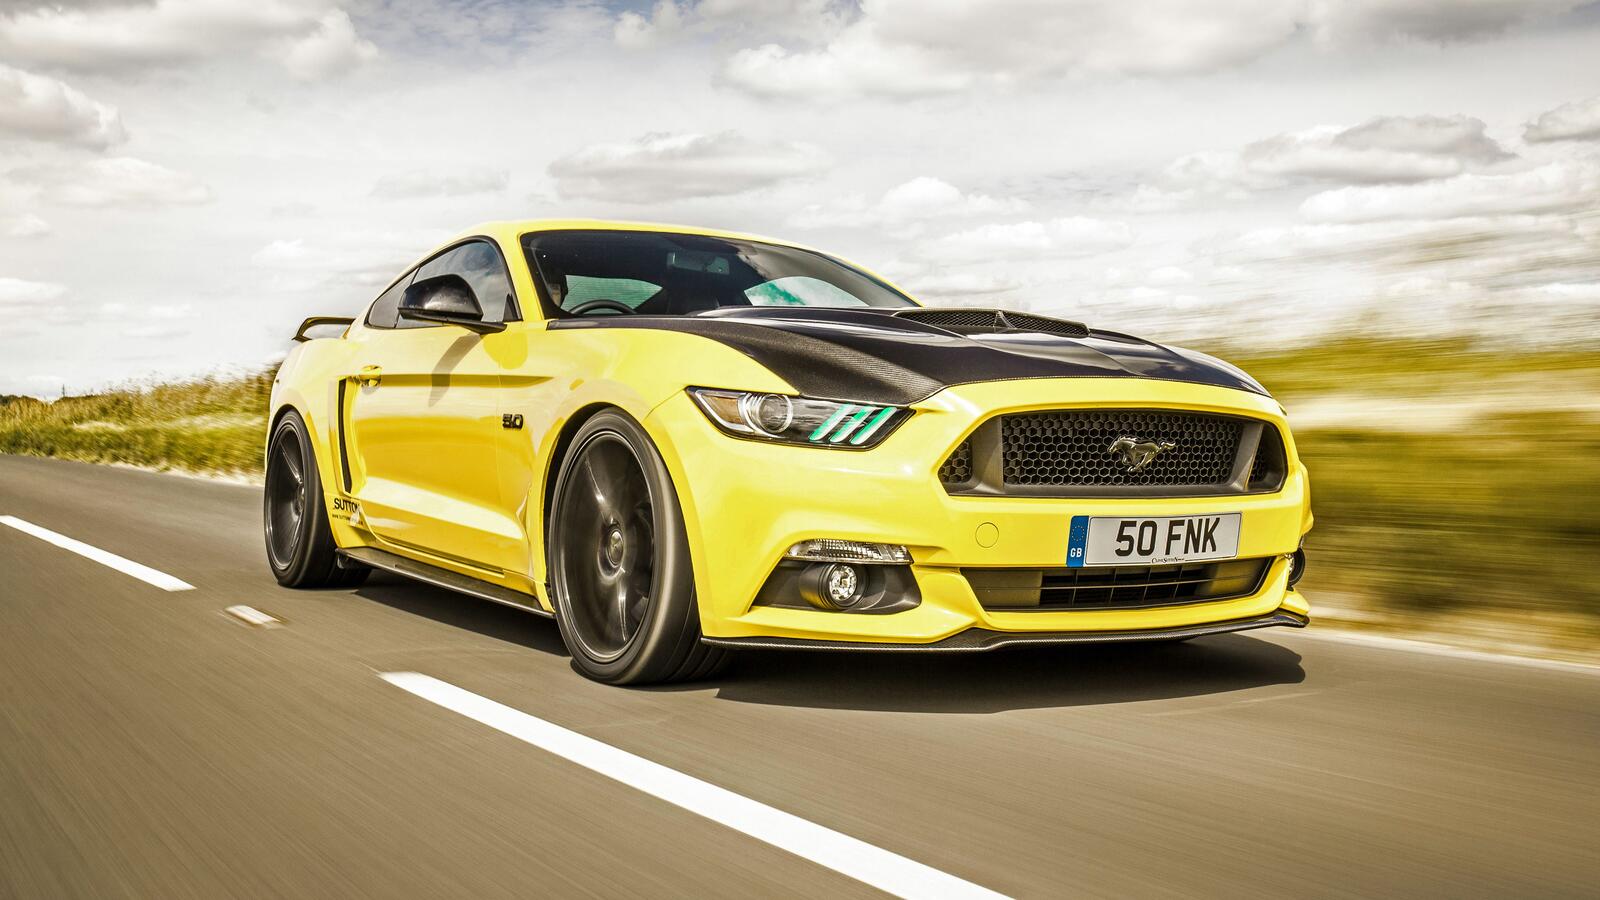 Free photo A yellow Ford Mustang with a black hood rushes down the road